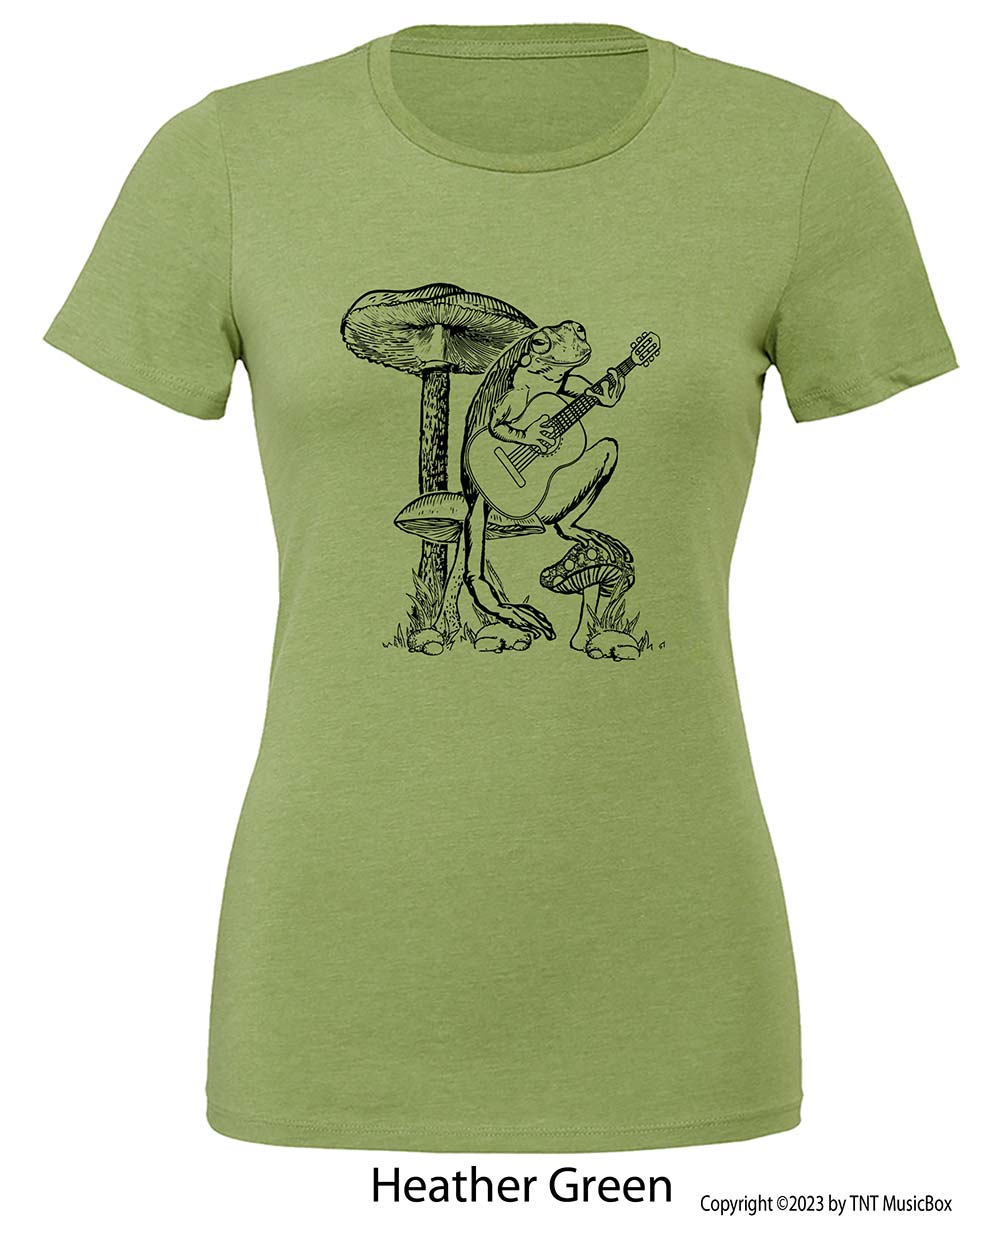 Frog Playing Guitar on a Heather Green T-shirt